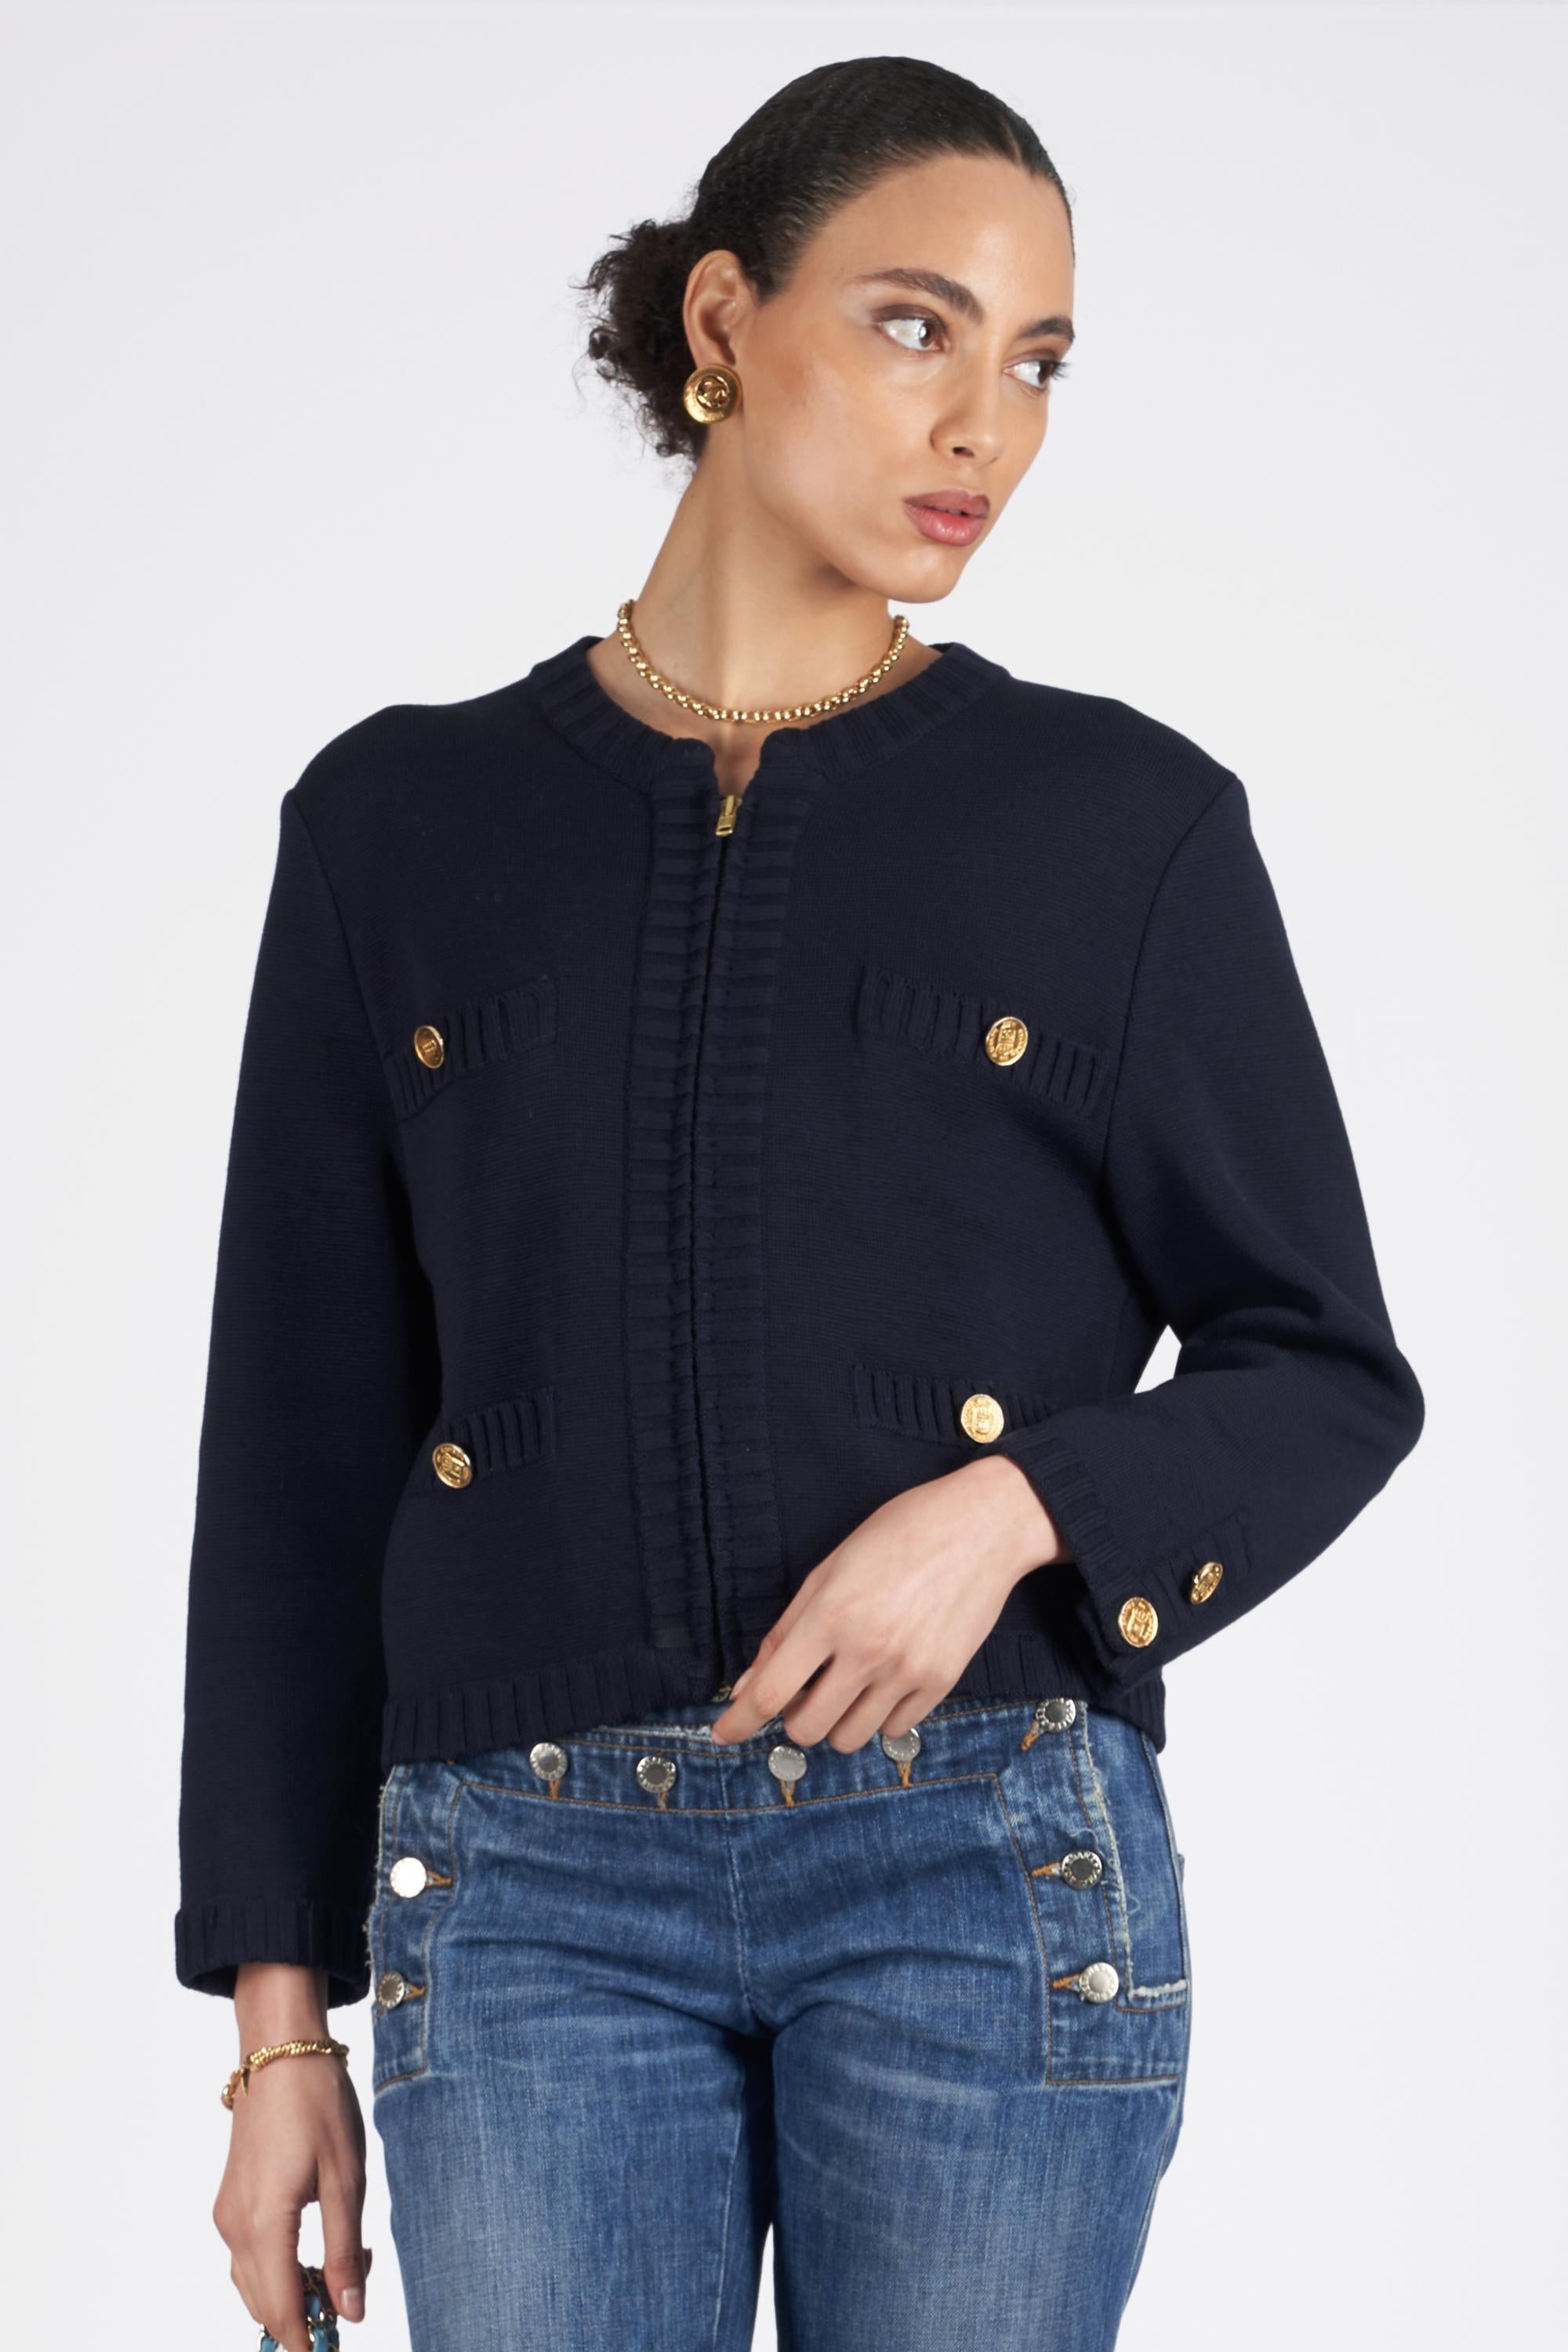 Nordic Poetry is excited to present this rare Chanel 1980’s navy cardigan. Features zip closure, pockets and Chanel engraved hardware. In excellent vintage condition. Authenticity guaranteed.

Label size: N/A
Modern size: UK: 8 to 10, US: 6 to 8,